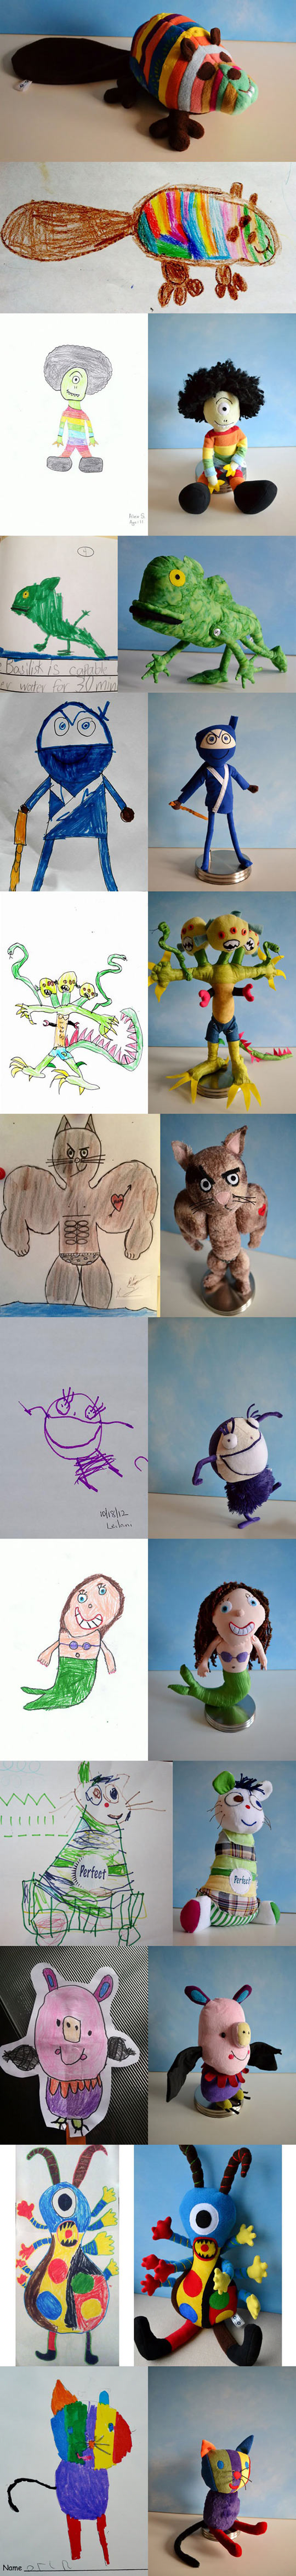 Talented Artist Transforms Kids Drawings Into Plush Toys